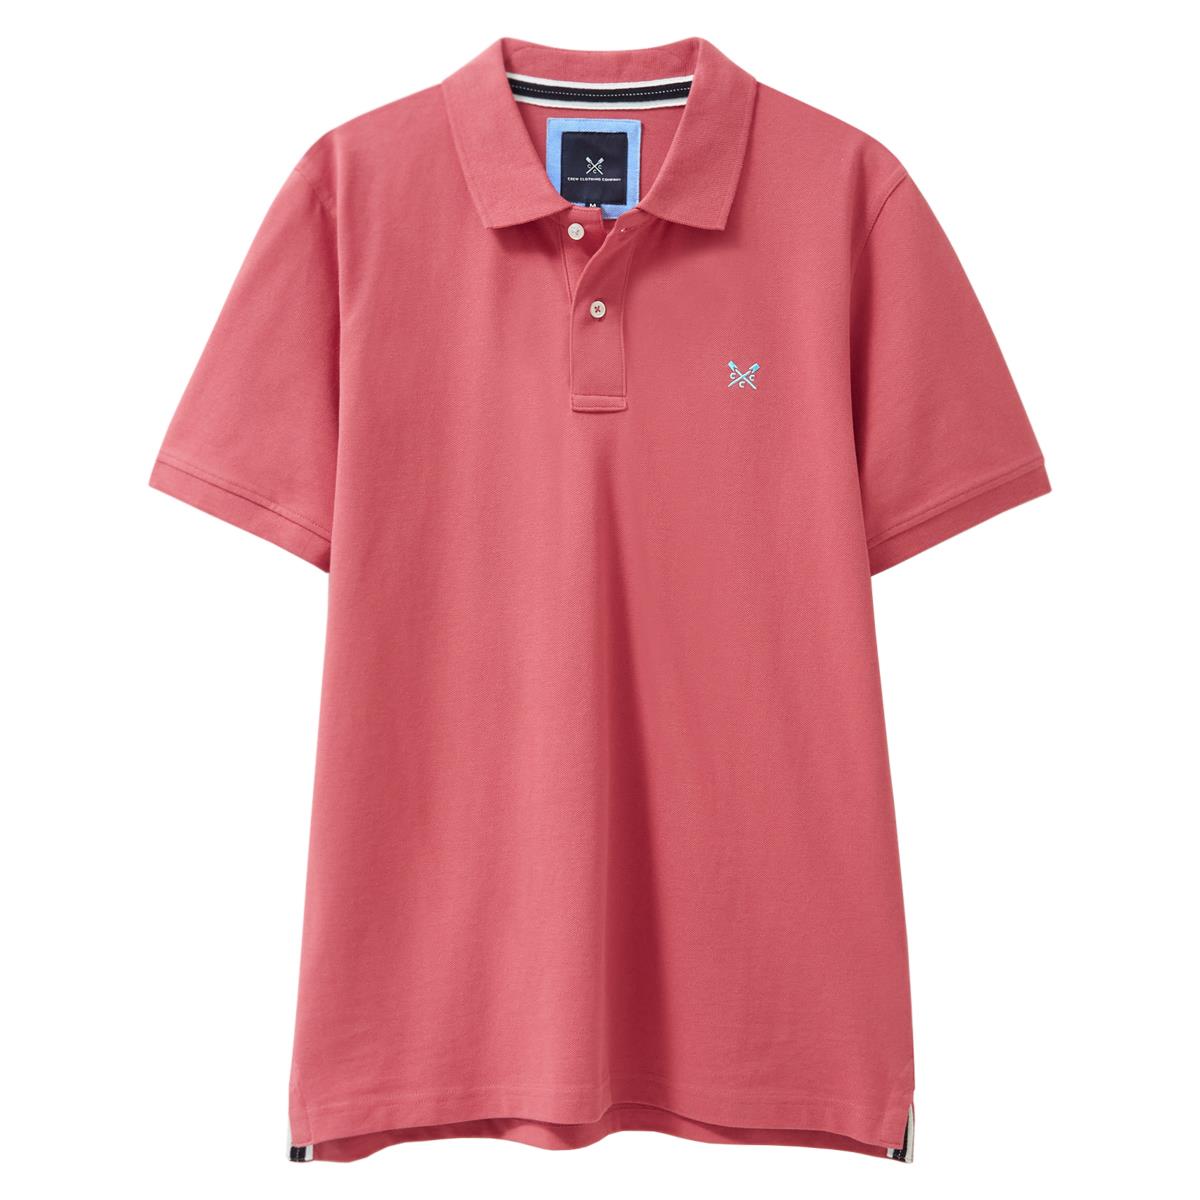 What sizes and colors are offered for crew polo shirts?